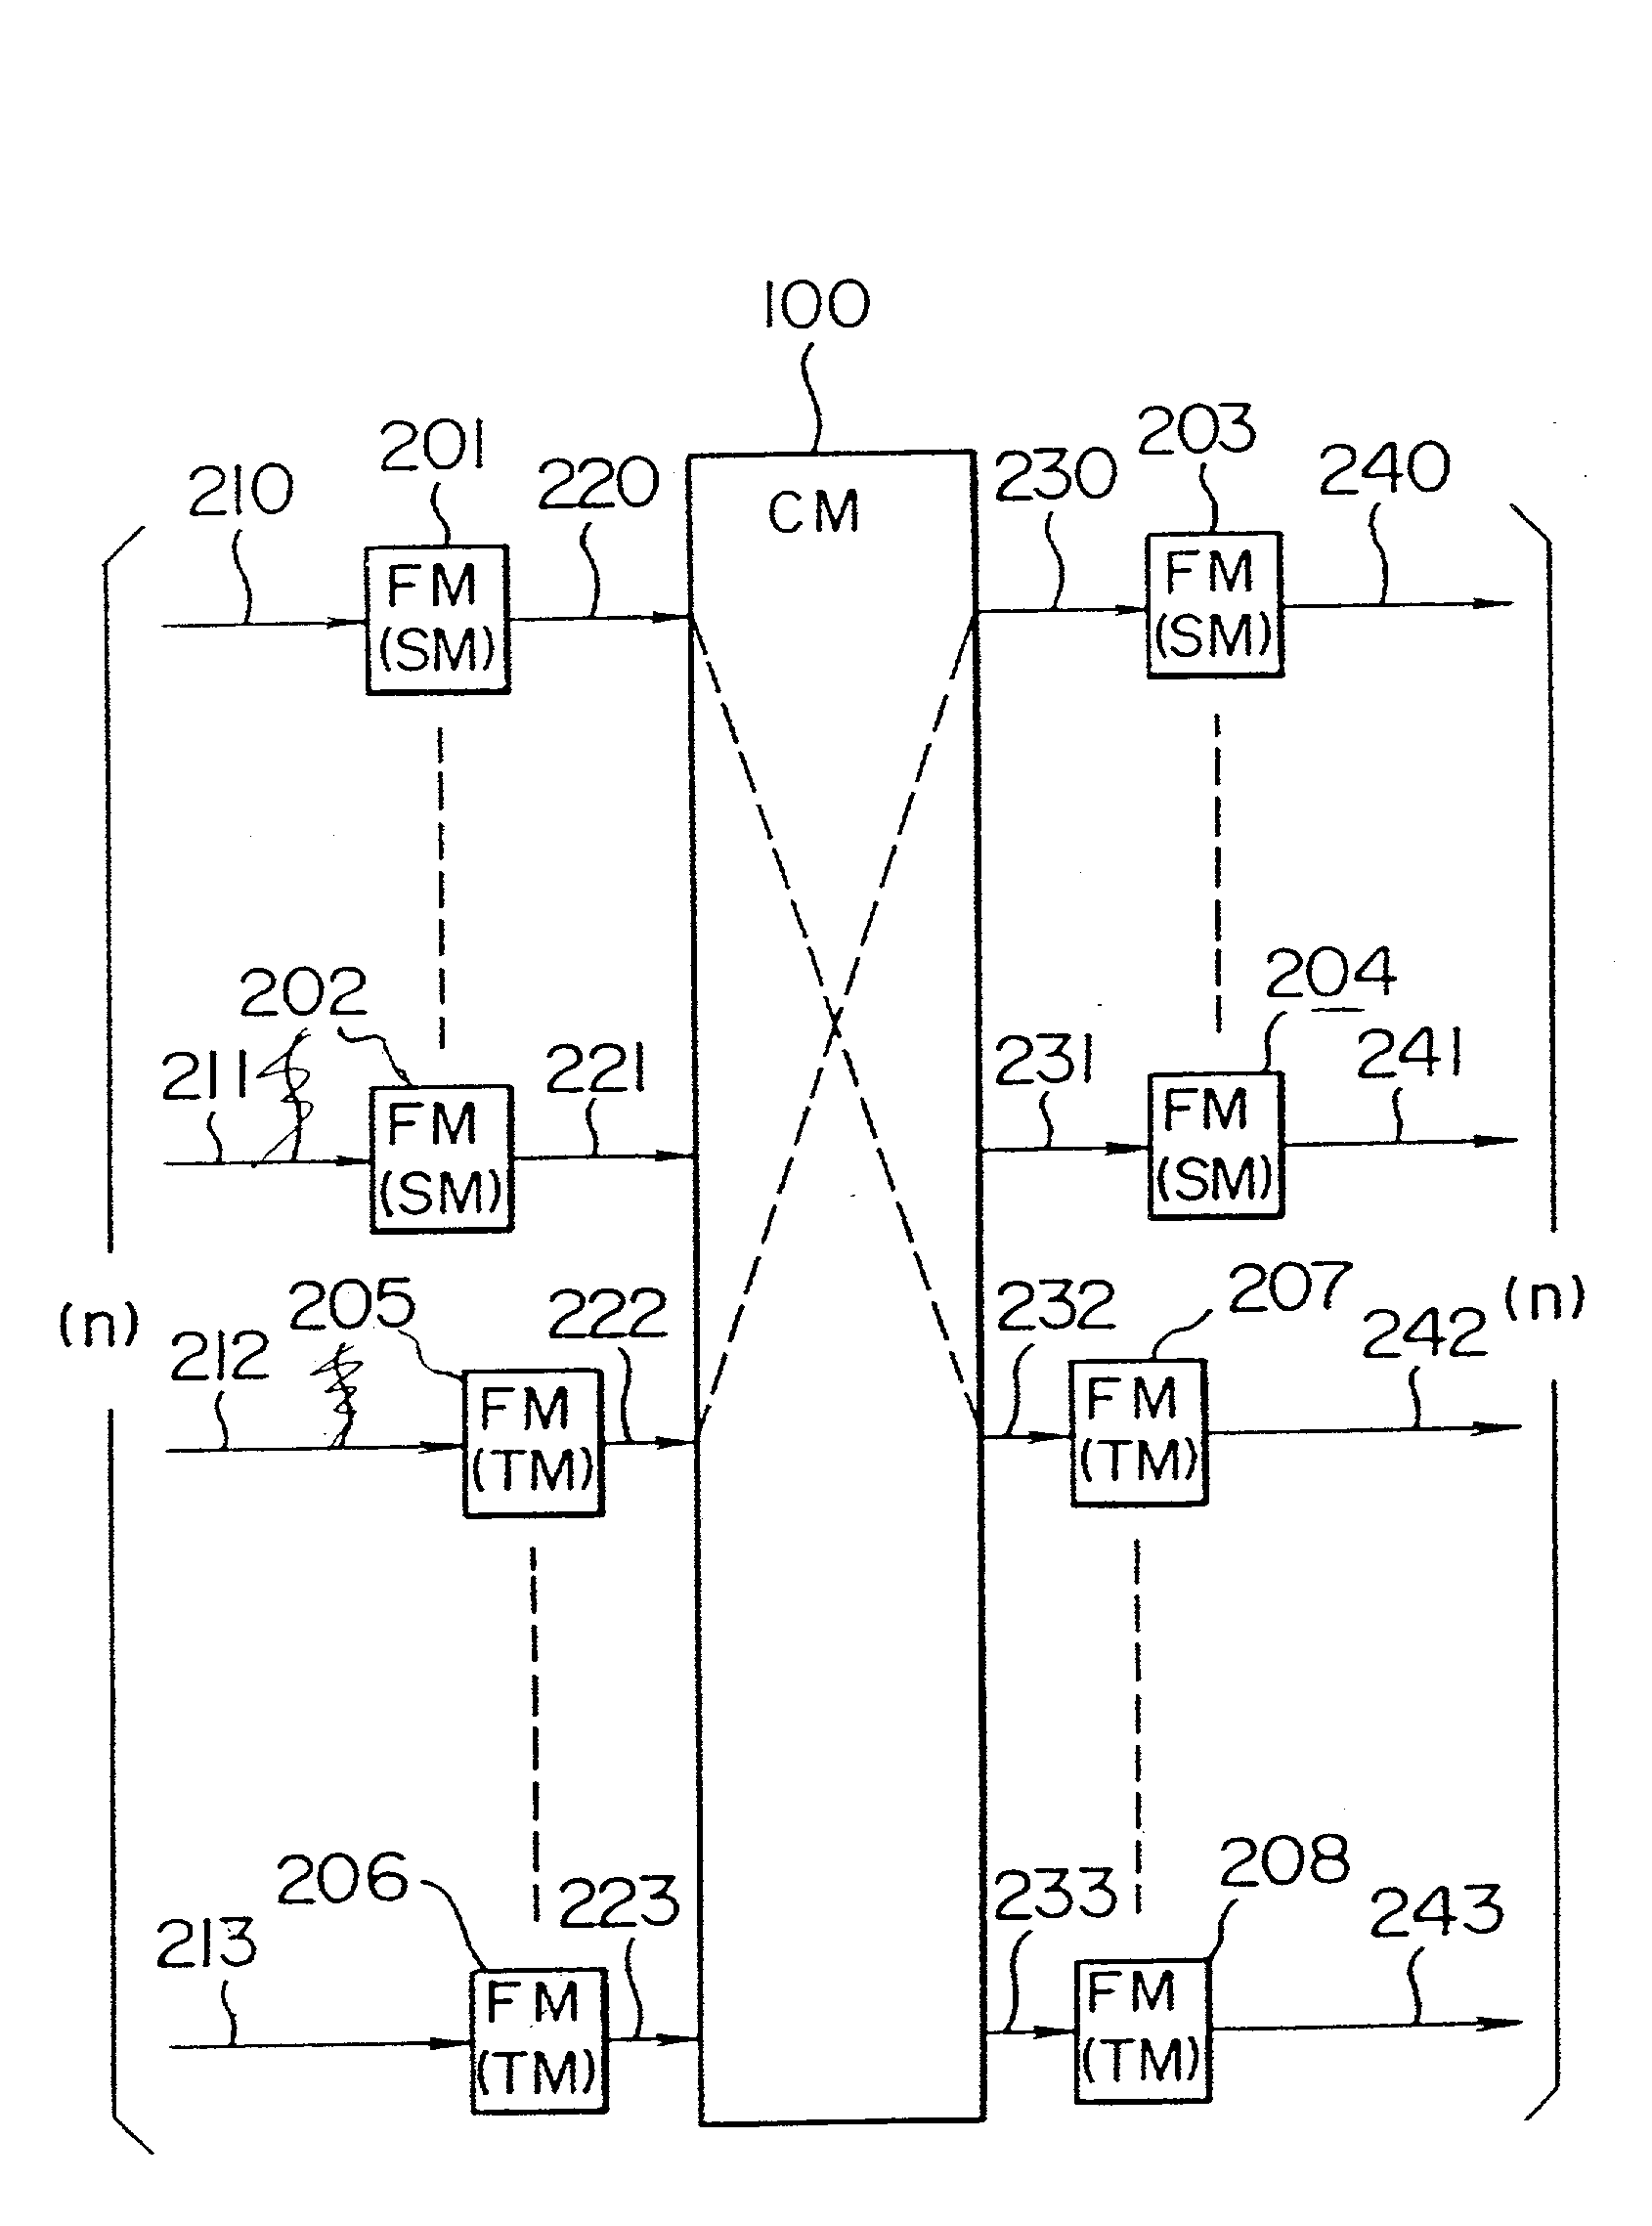 Distributed type switching system